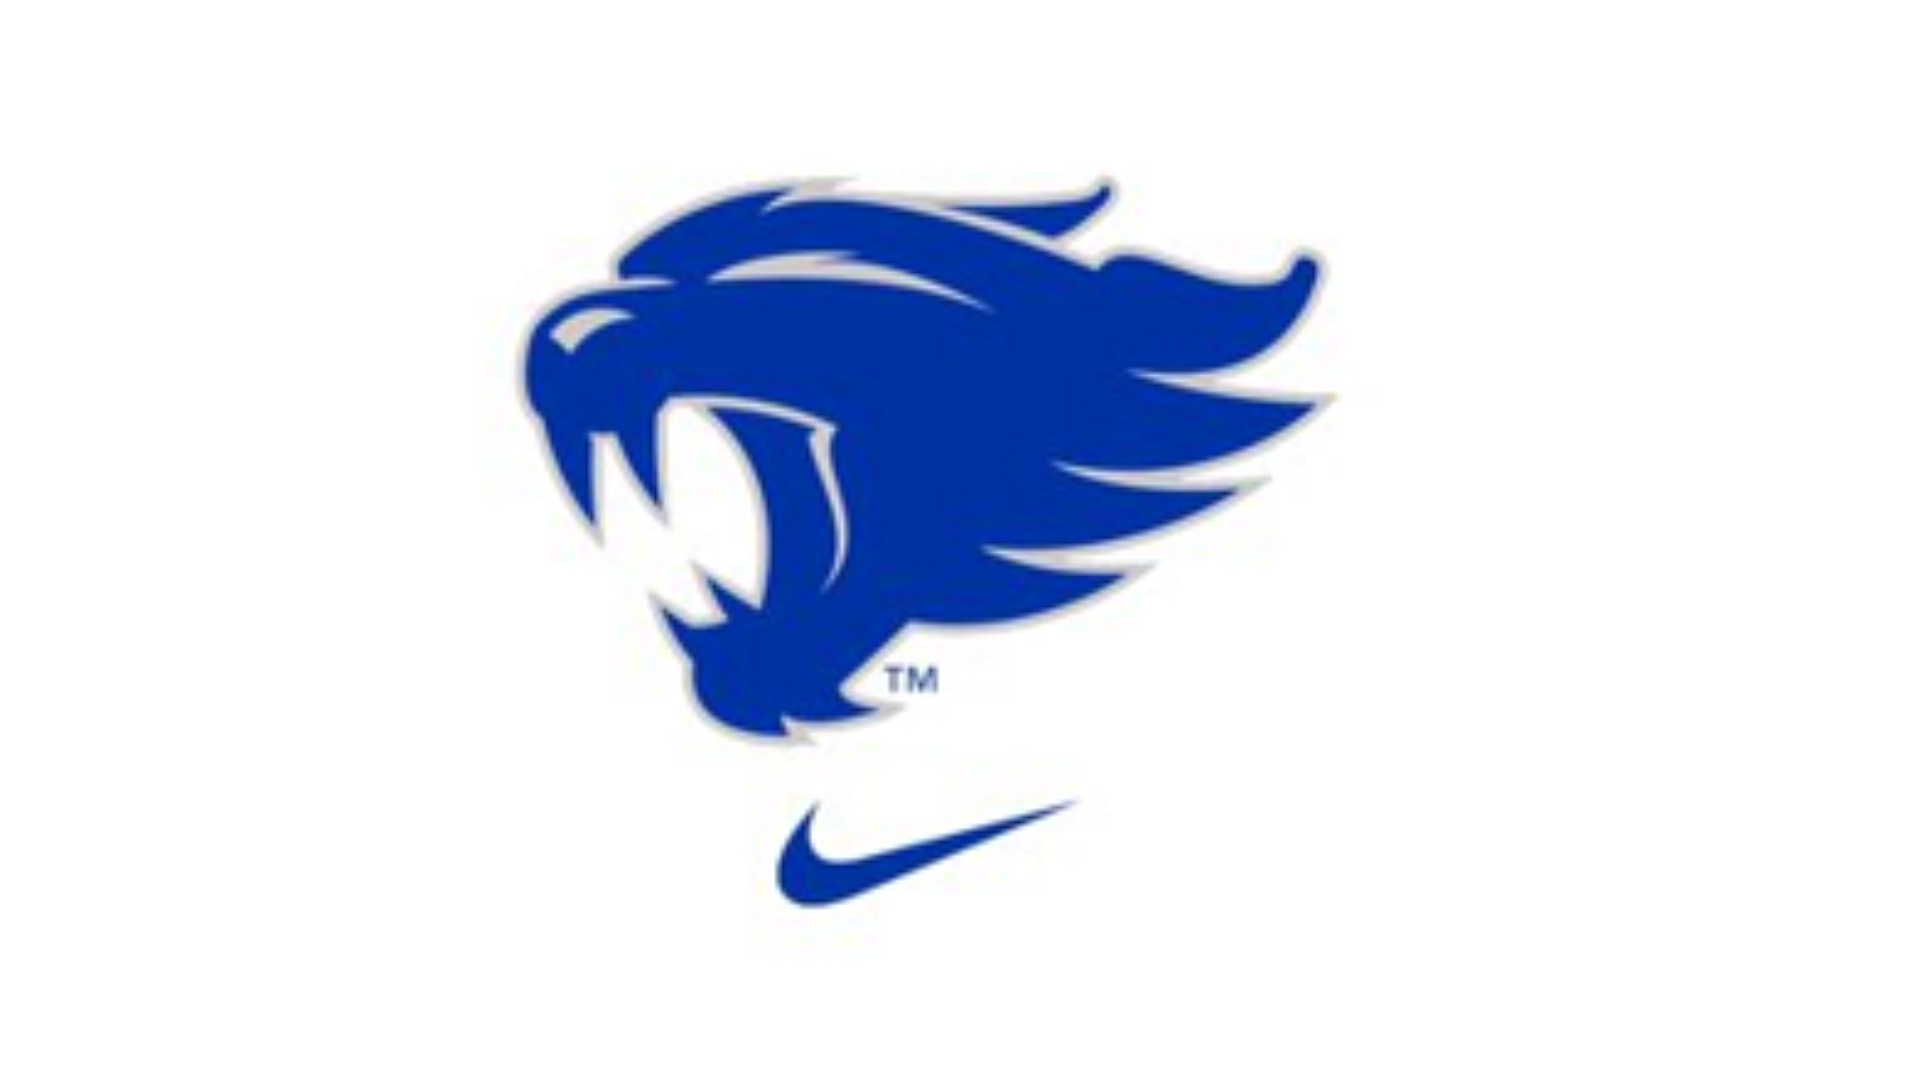 Kentucky makes waves with new Wildcat logo